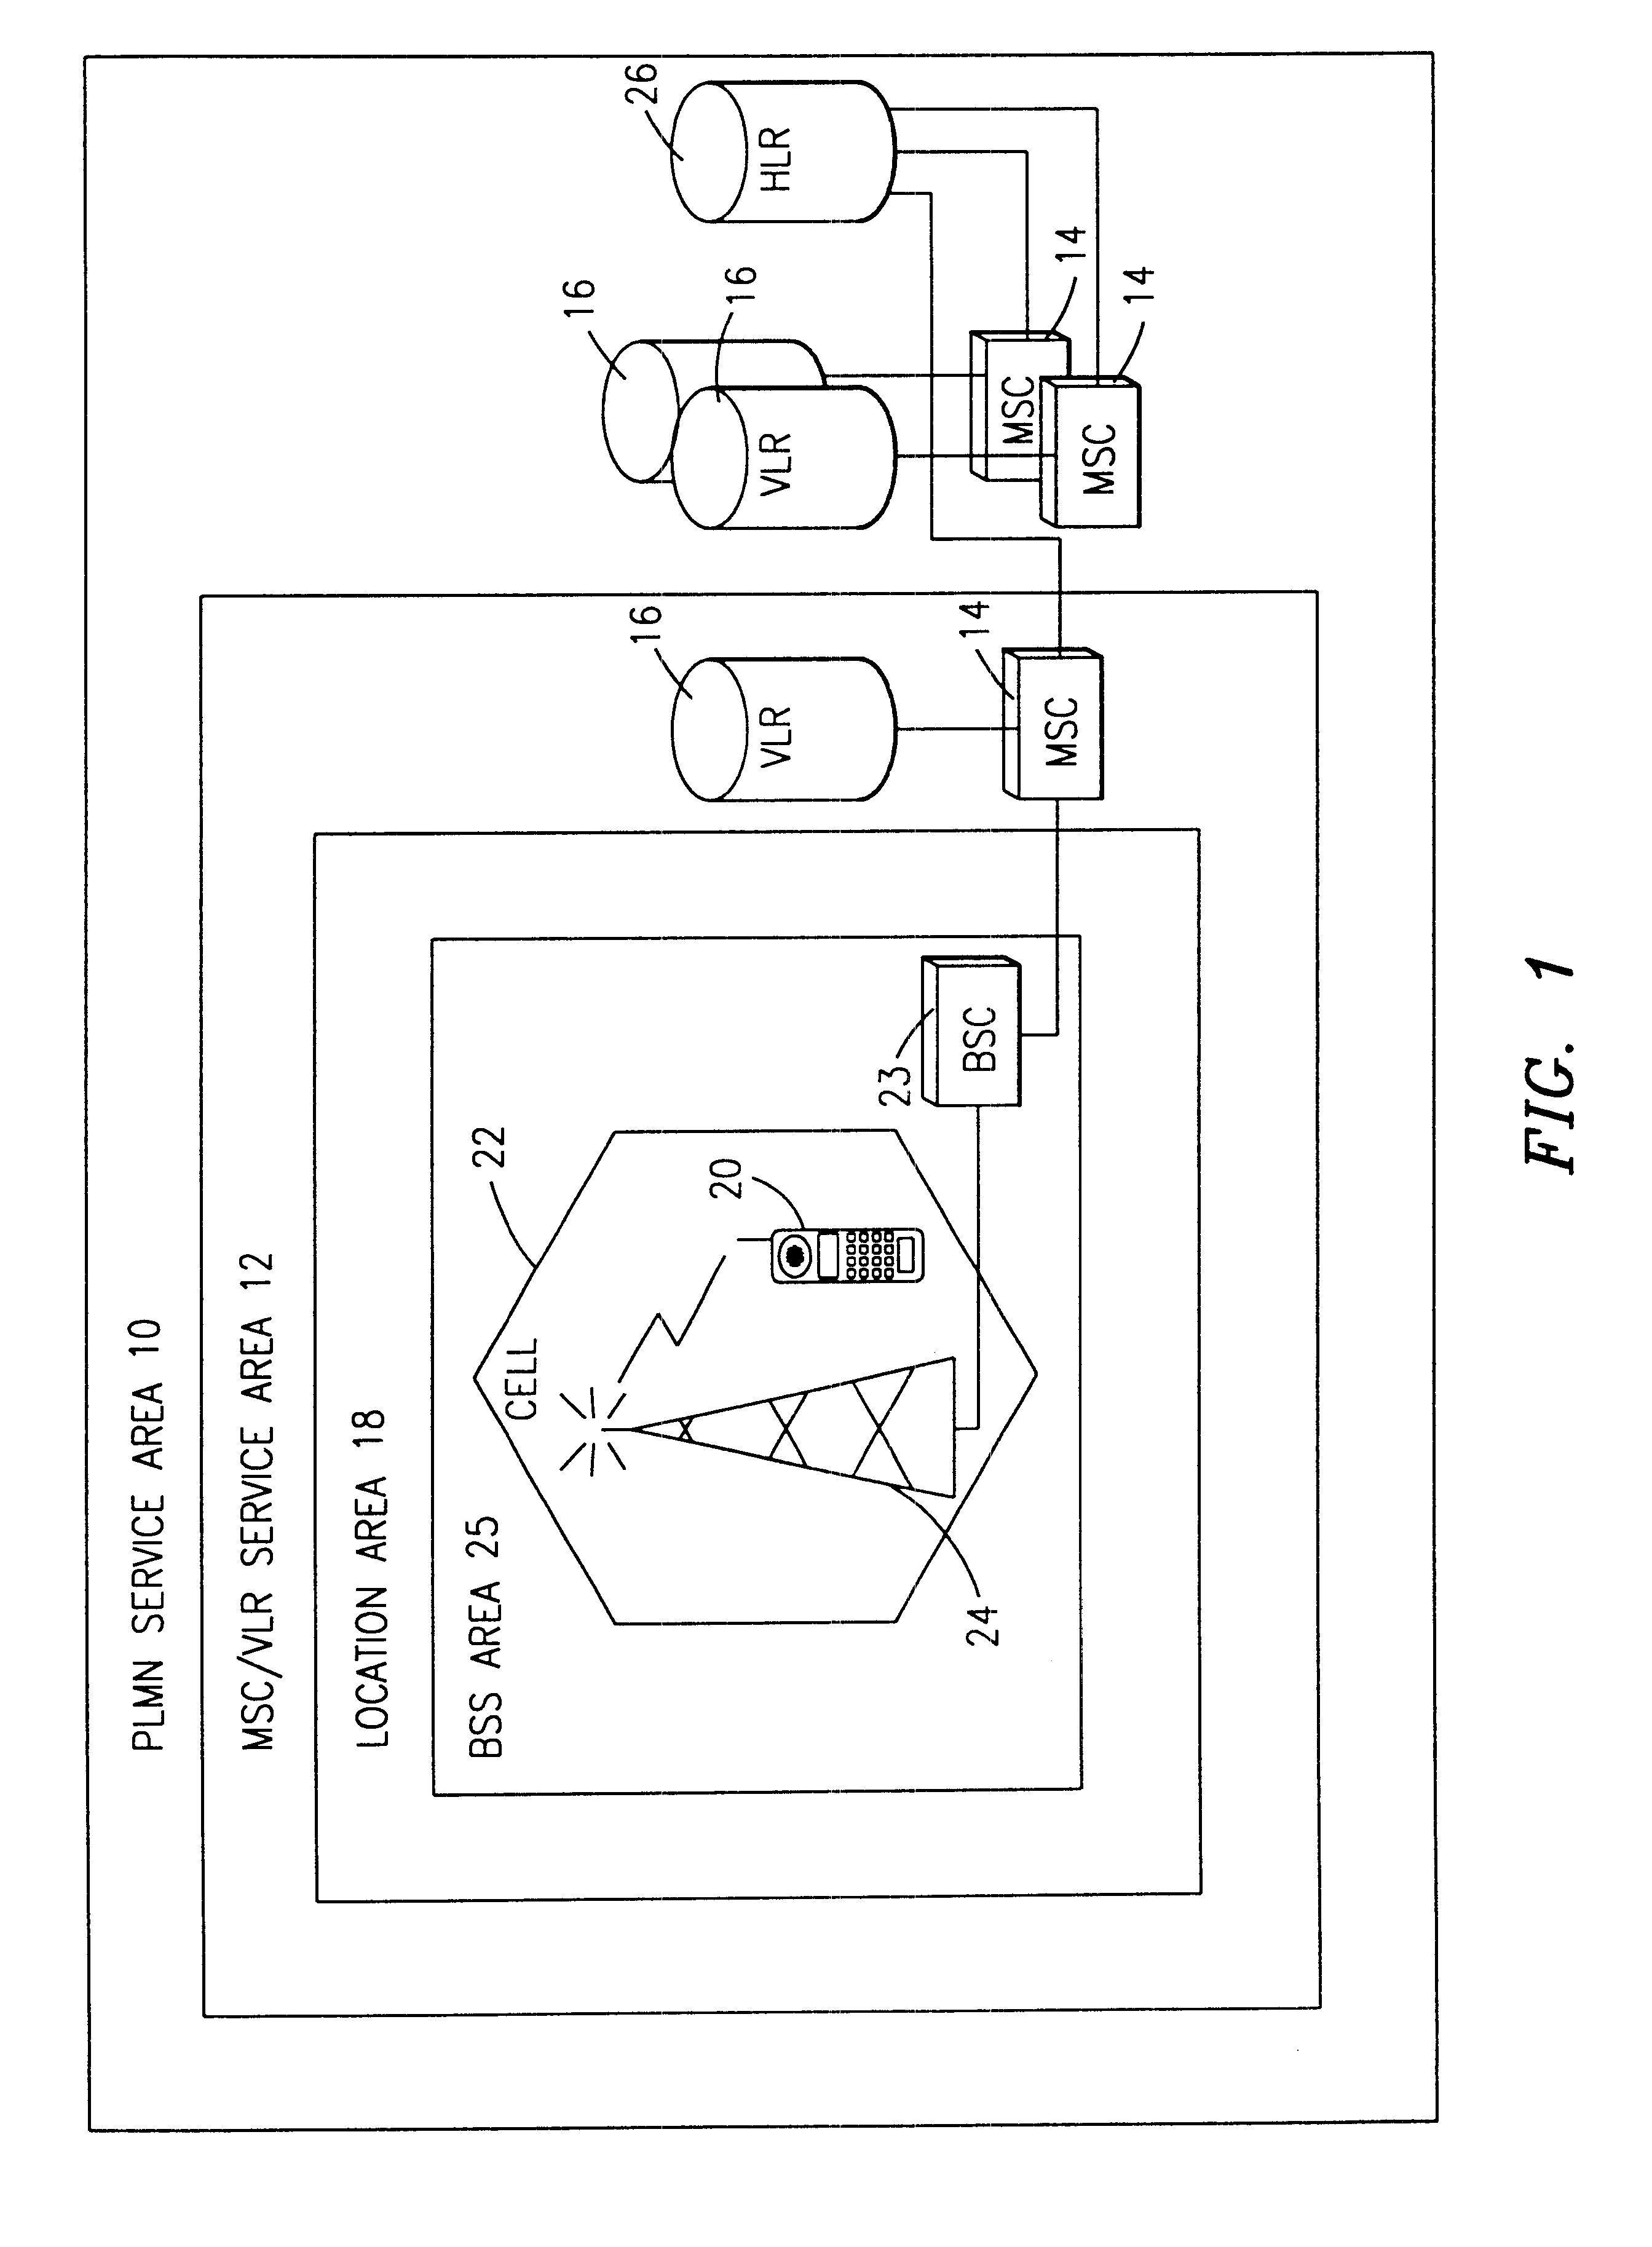 System and method for modification of satellite hop counter to reflect orbit type